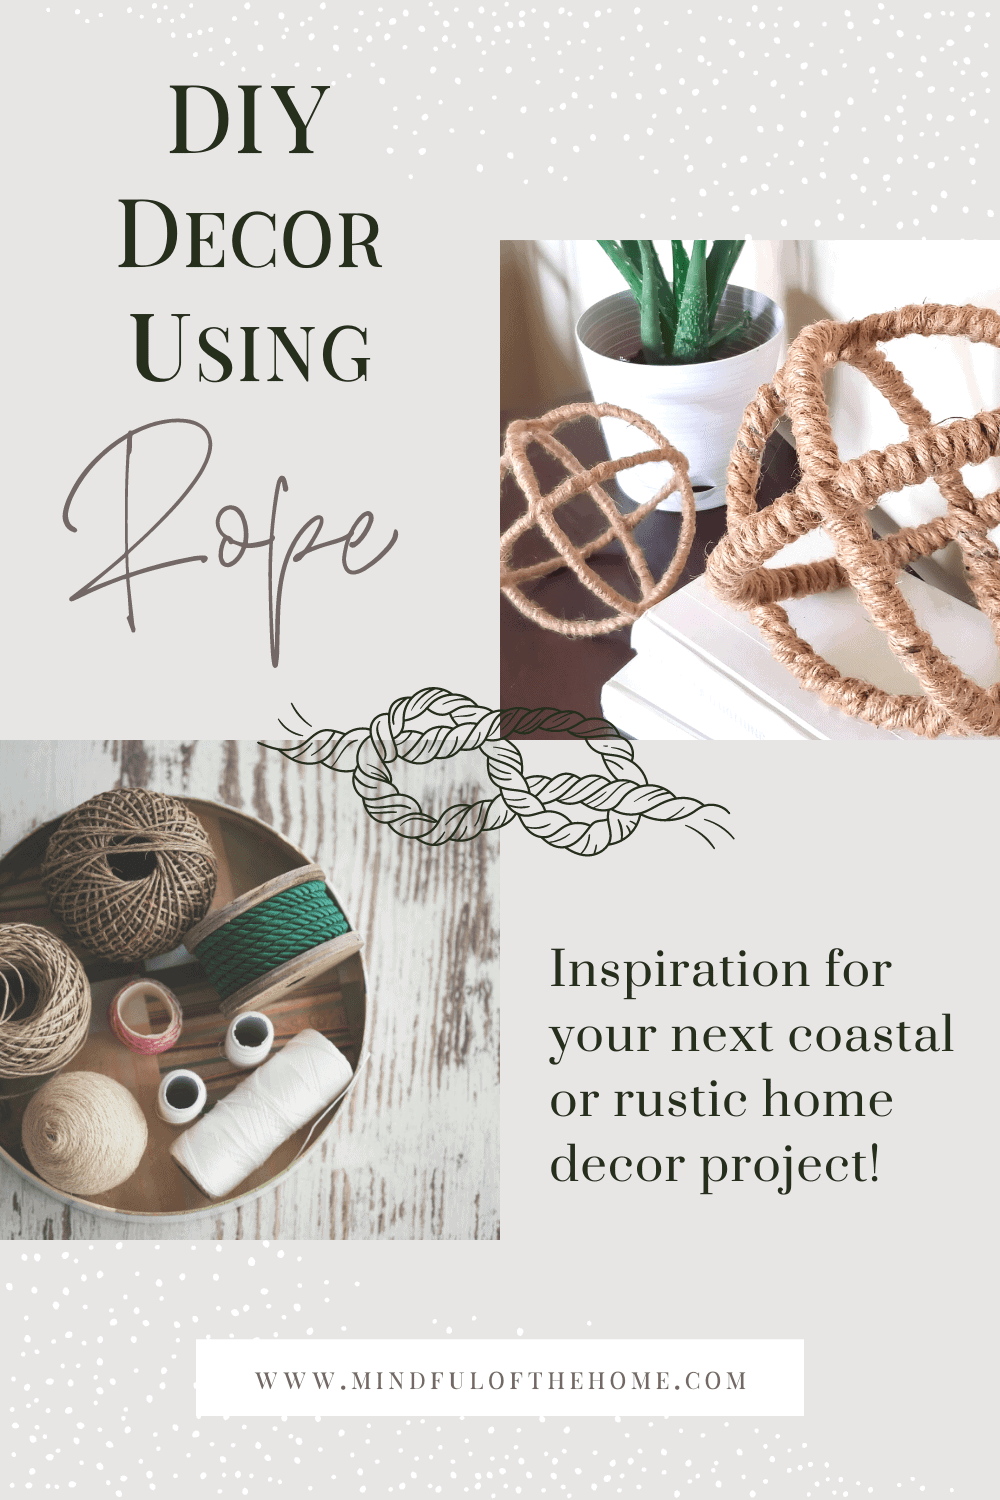 https://mindfulofthehome.com/wp-content/uploads/2019/03/diy-decor-using-rope-1000x1500.png